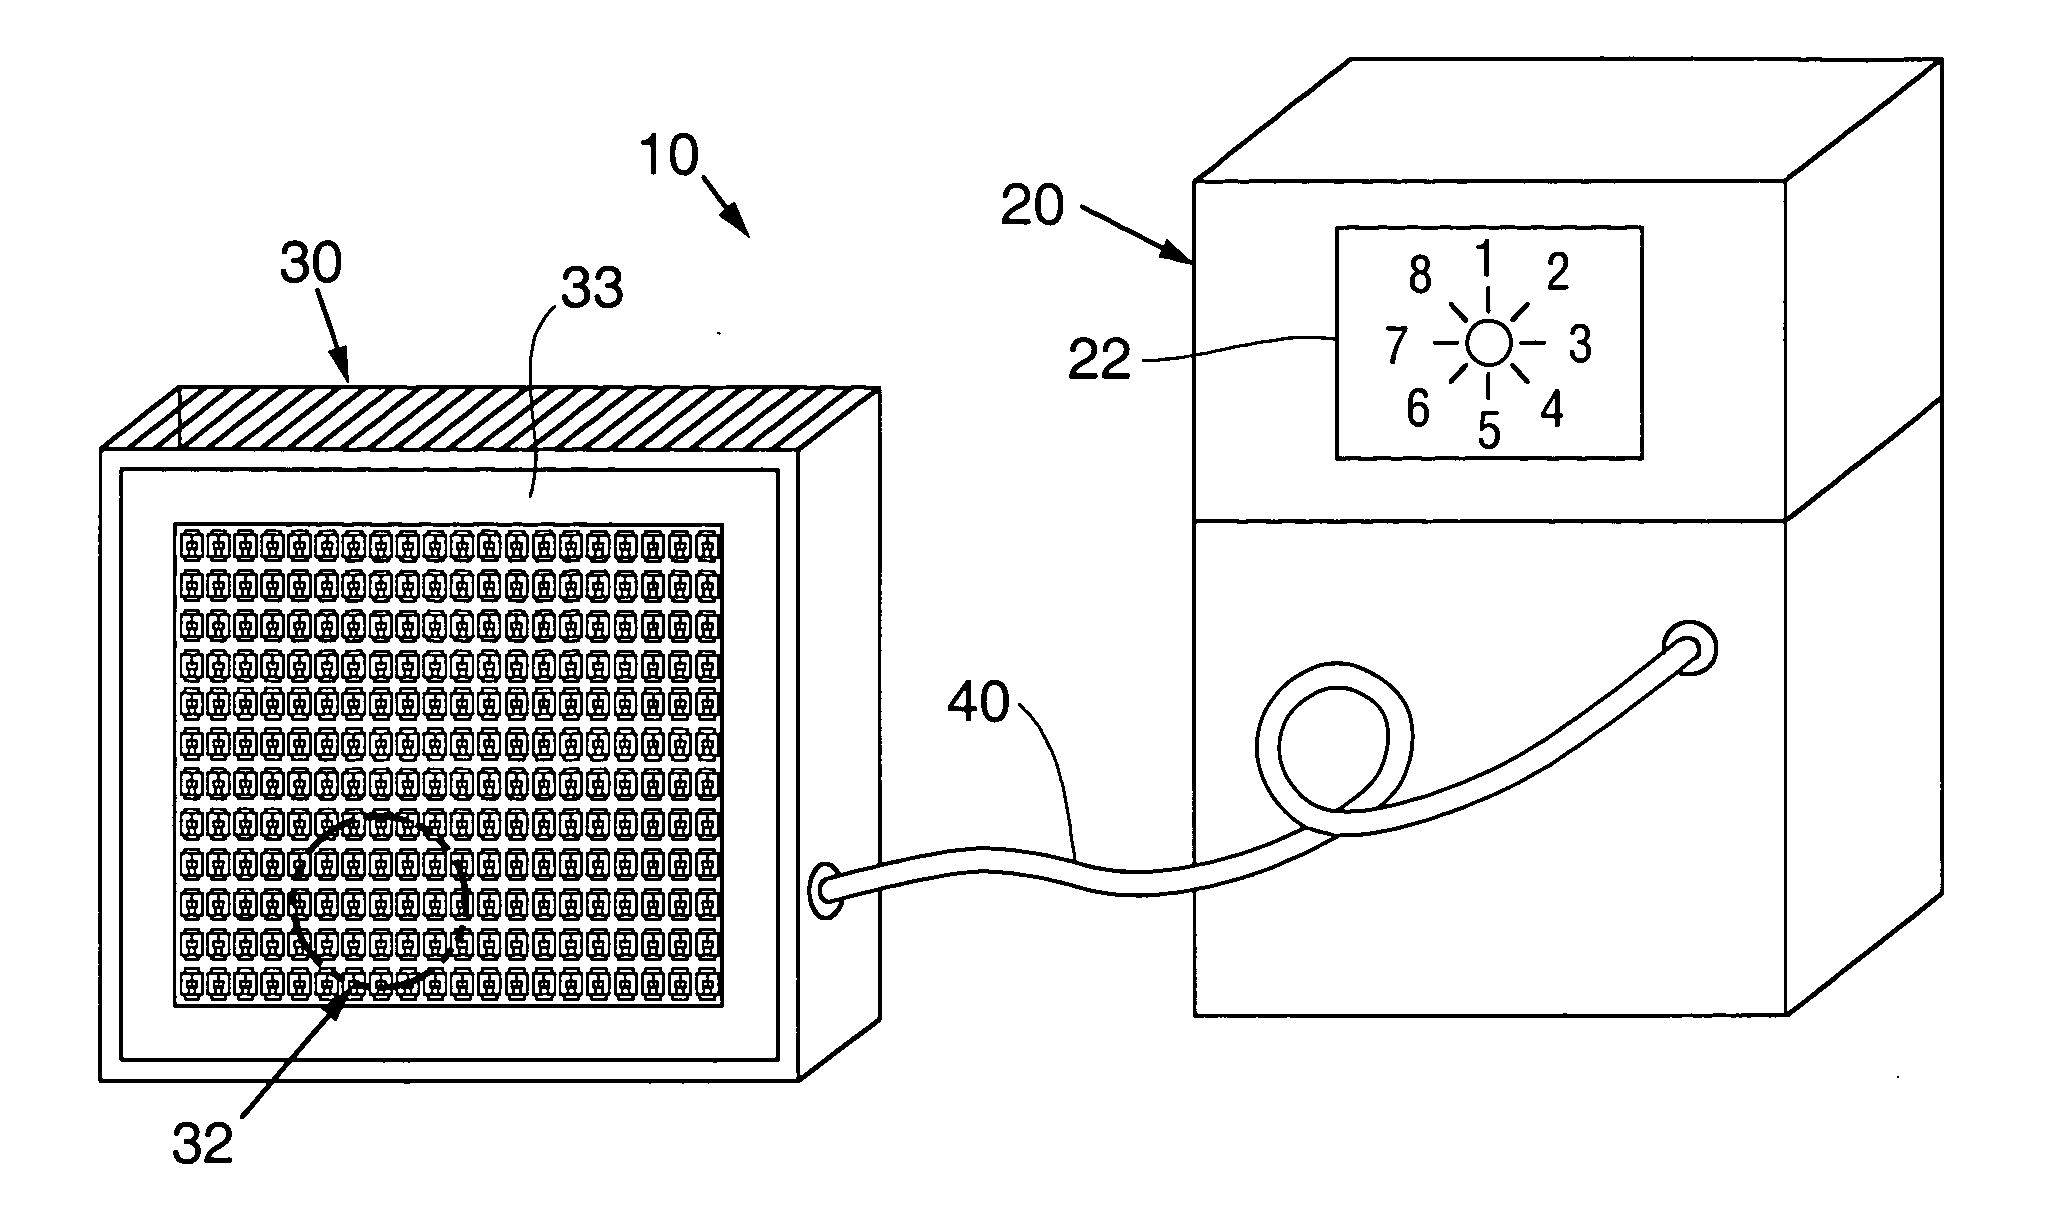 System and method for treating exposed tissue with light emitting diodes